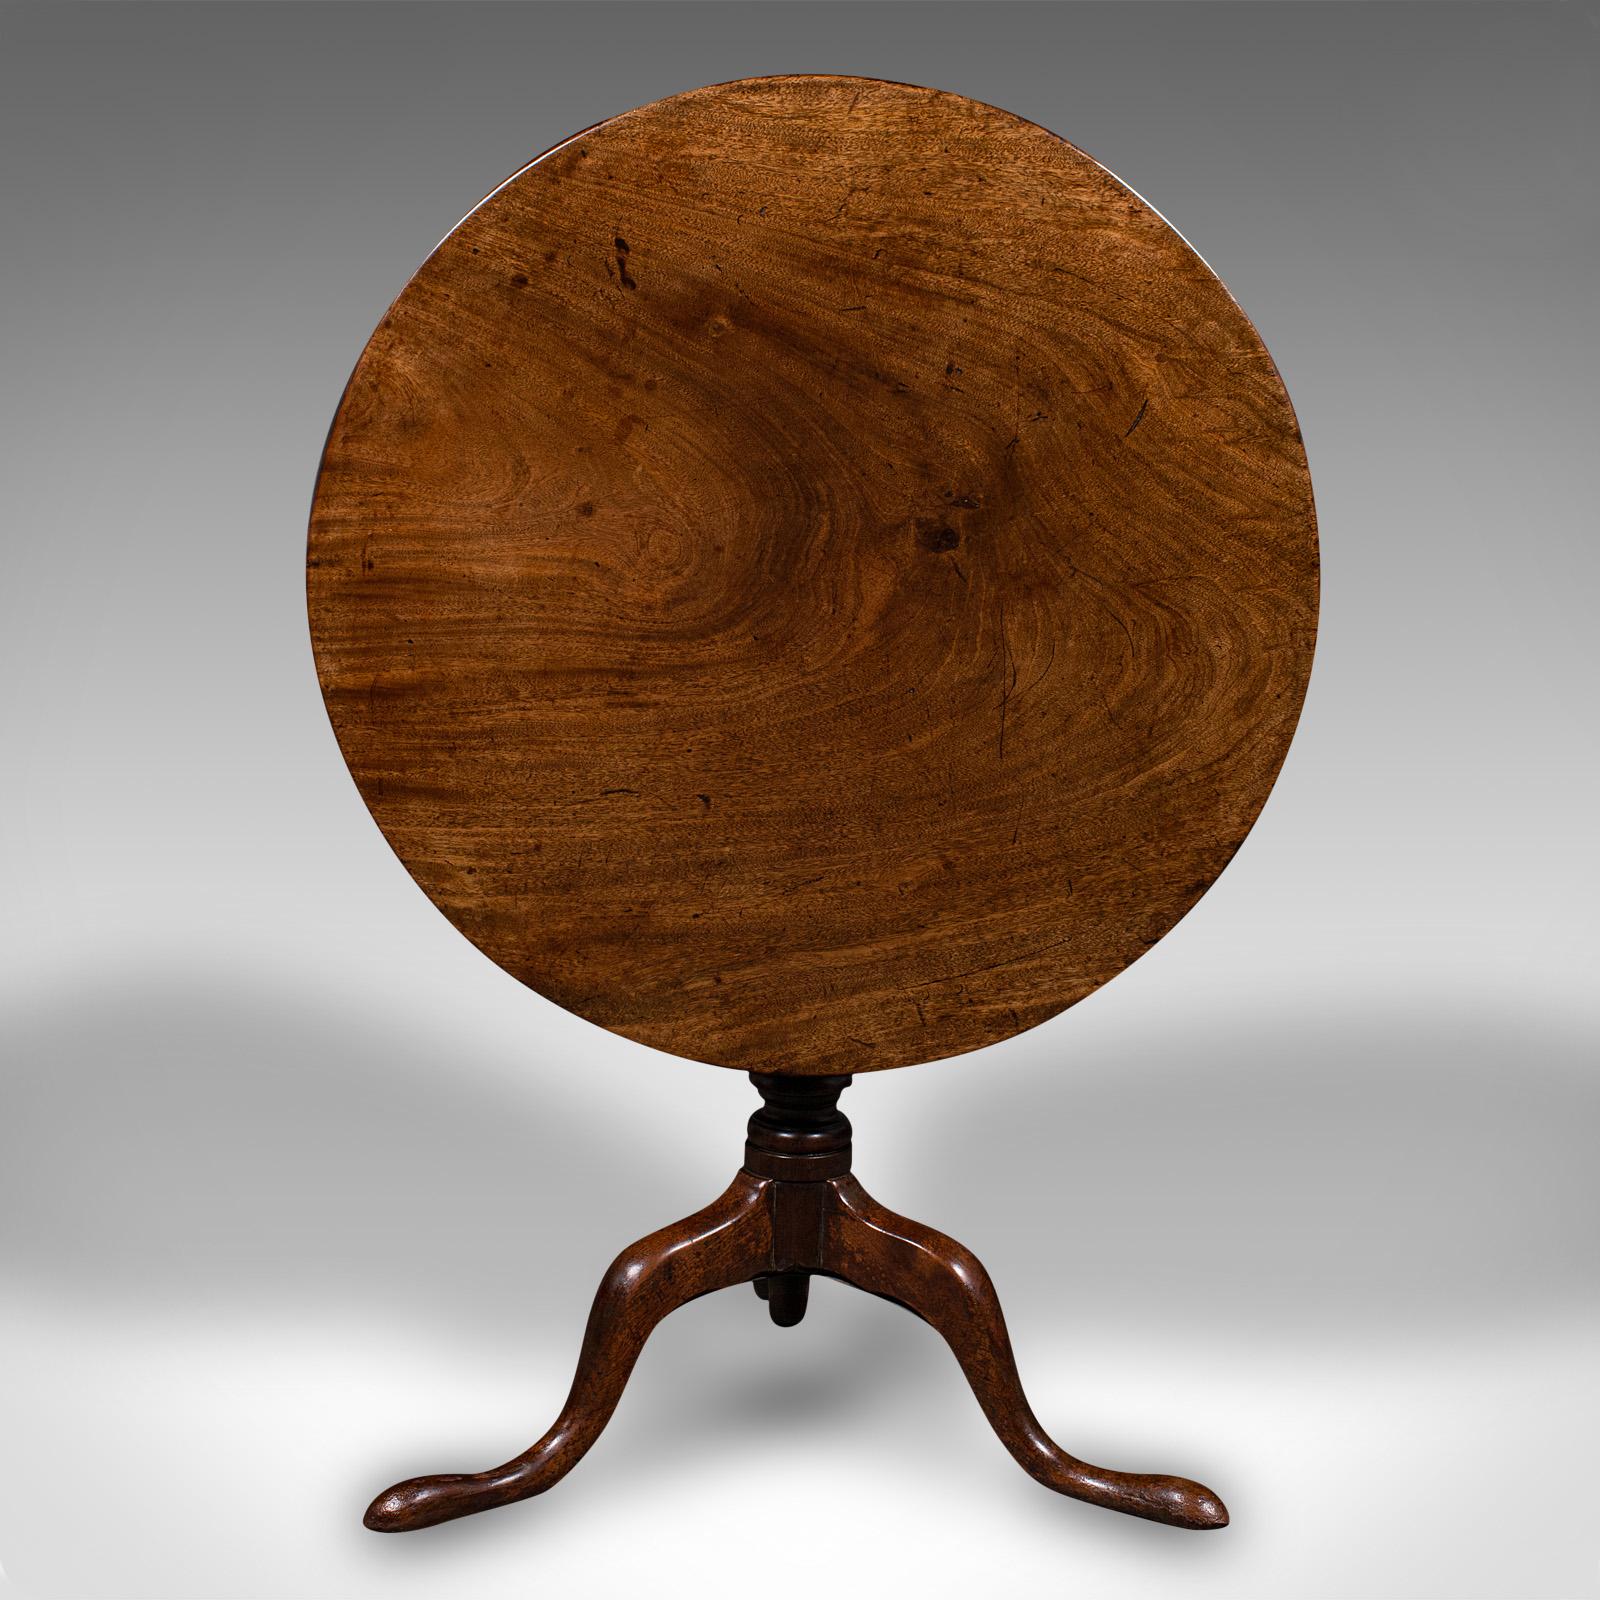 Antique Occasional Table, English, Tilt Top, Lamp, Afternoon Tea, Georgian, 1800 For Sale 3